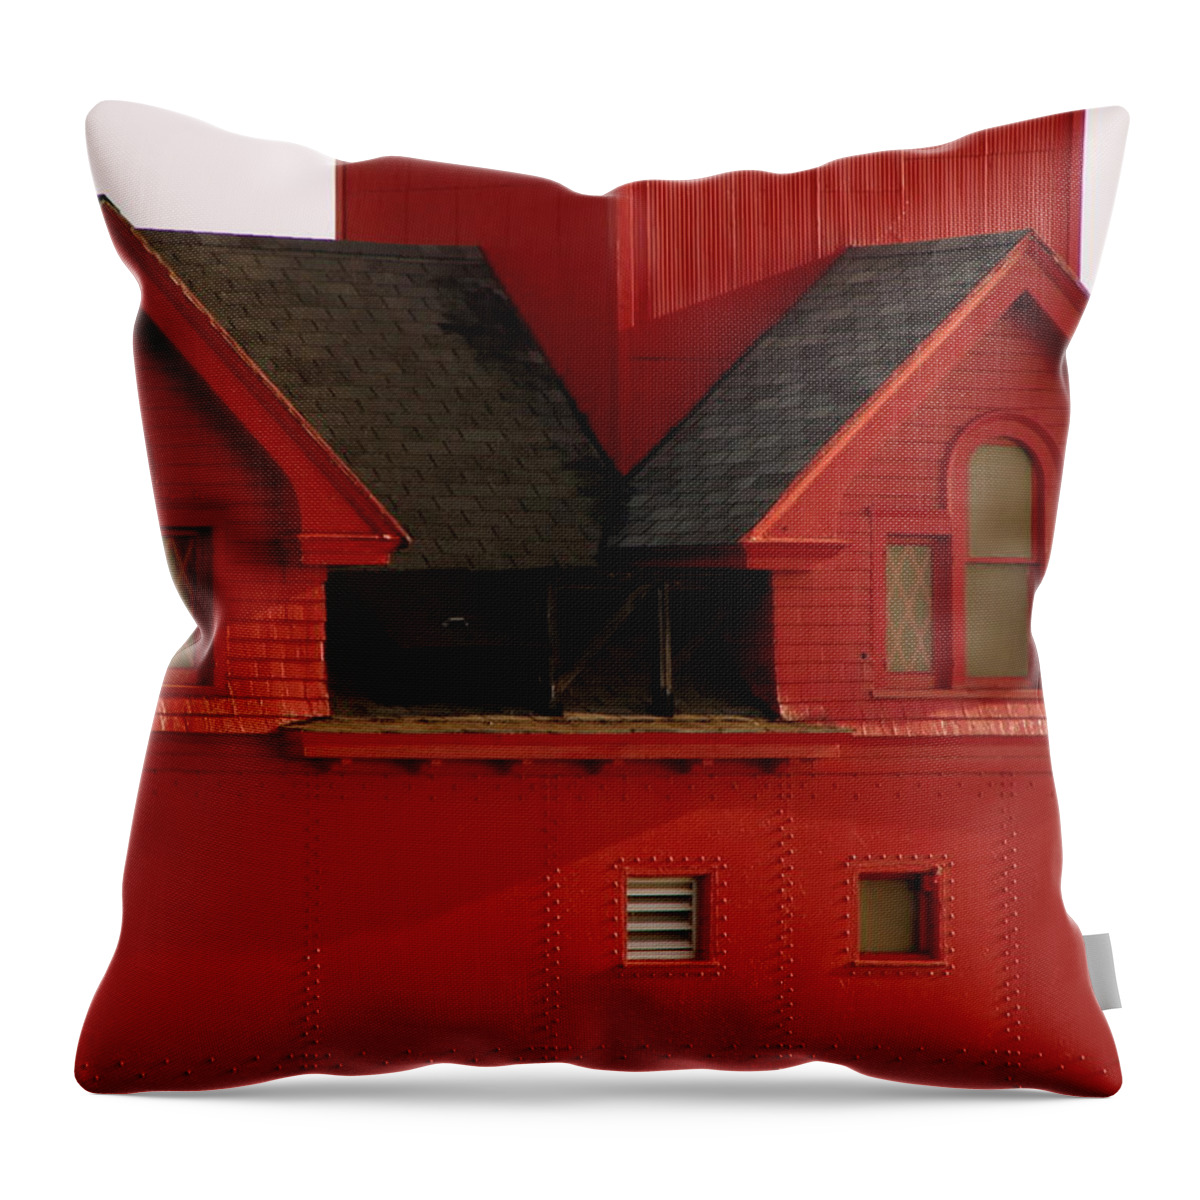 Windows Throw Pillow featuring the photograph Big Red Holland Harbor Light Michigan by Michelle Calkins